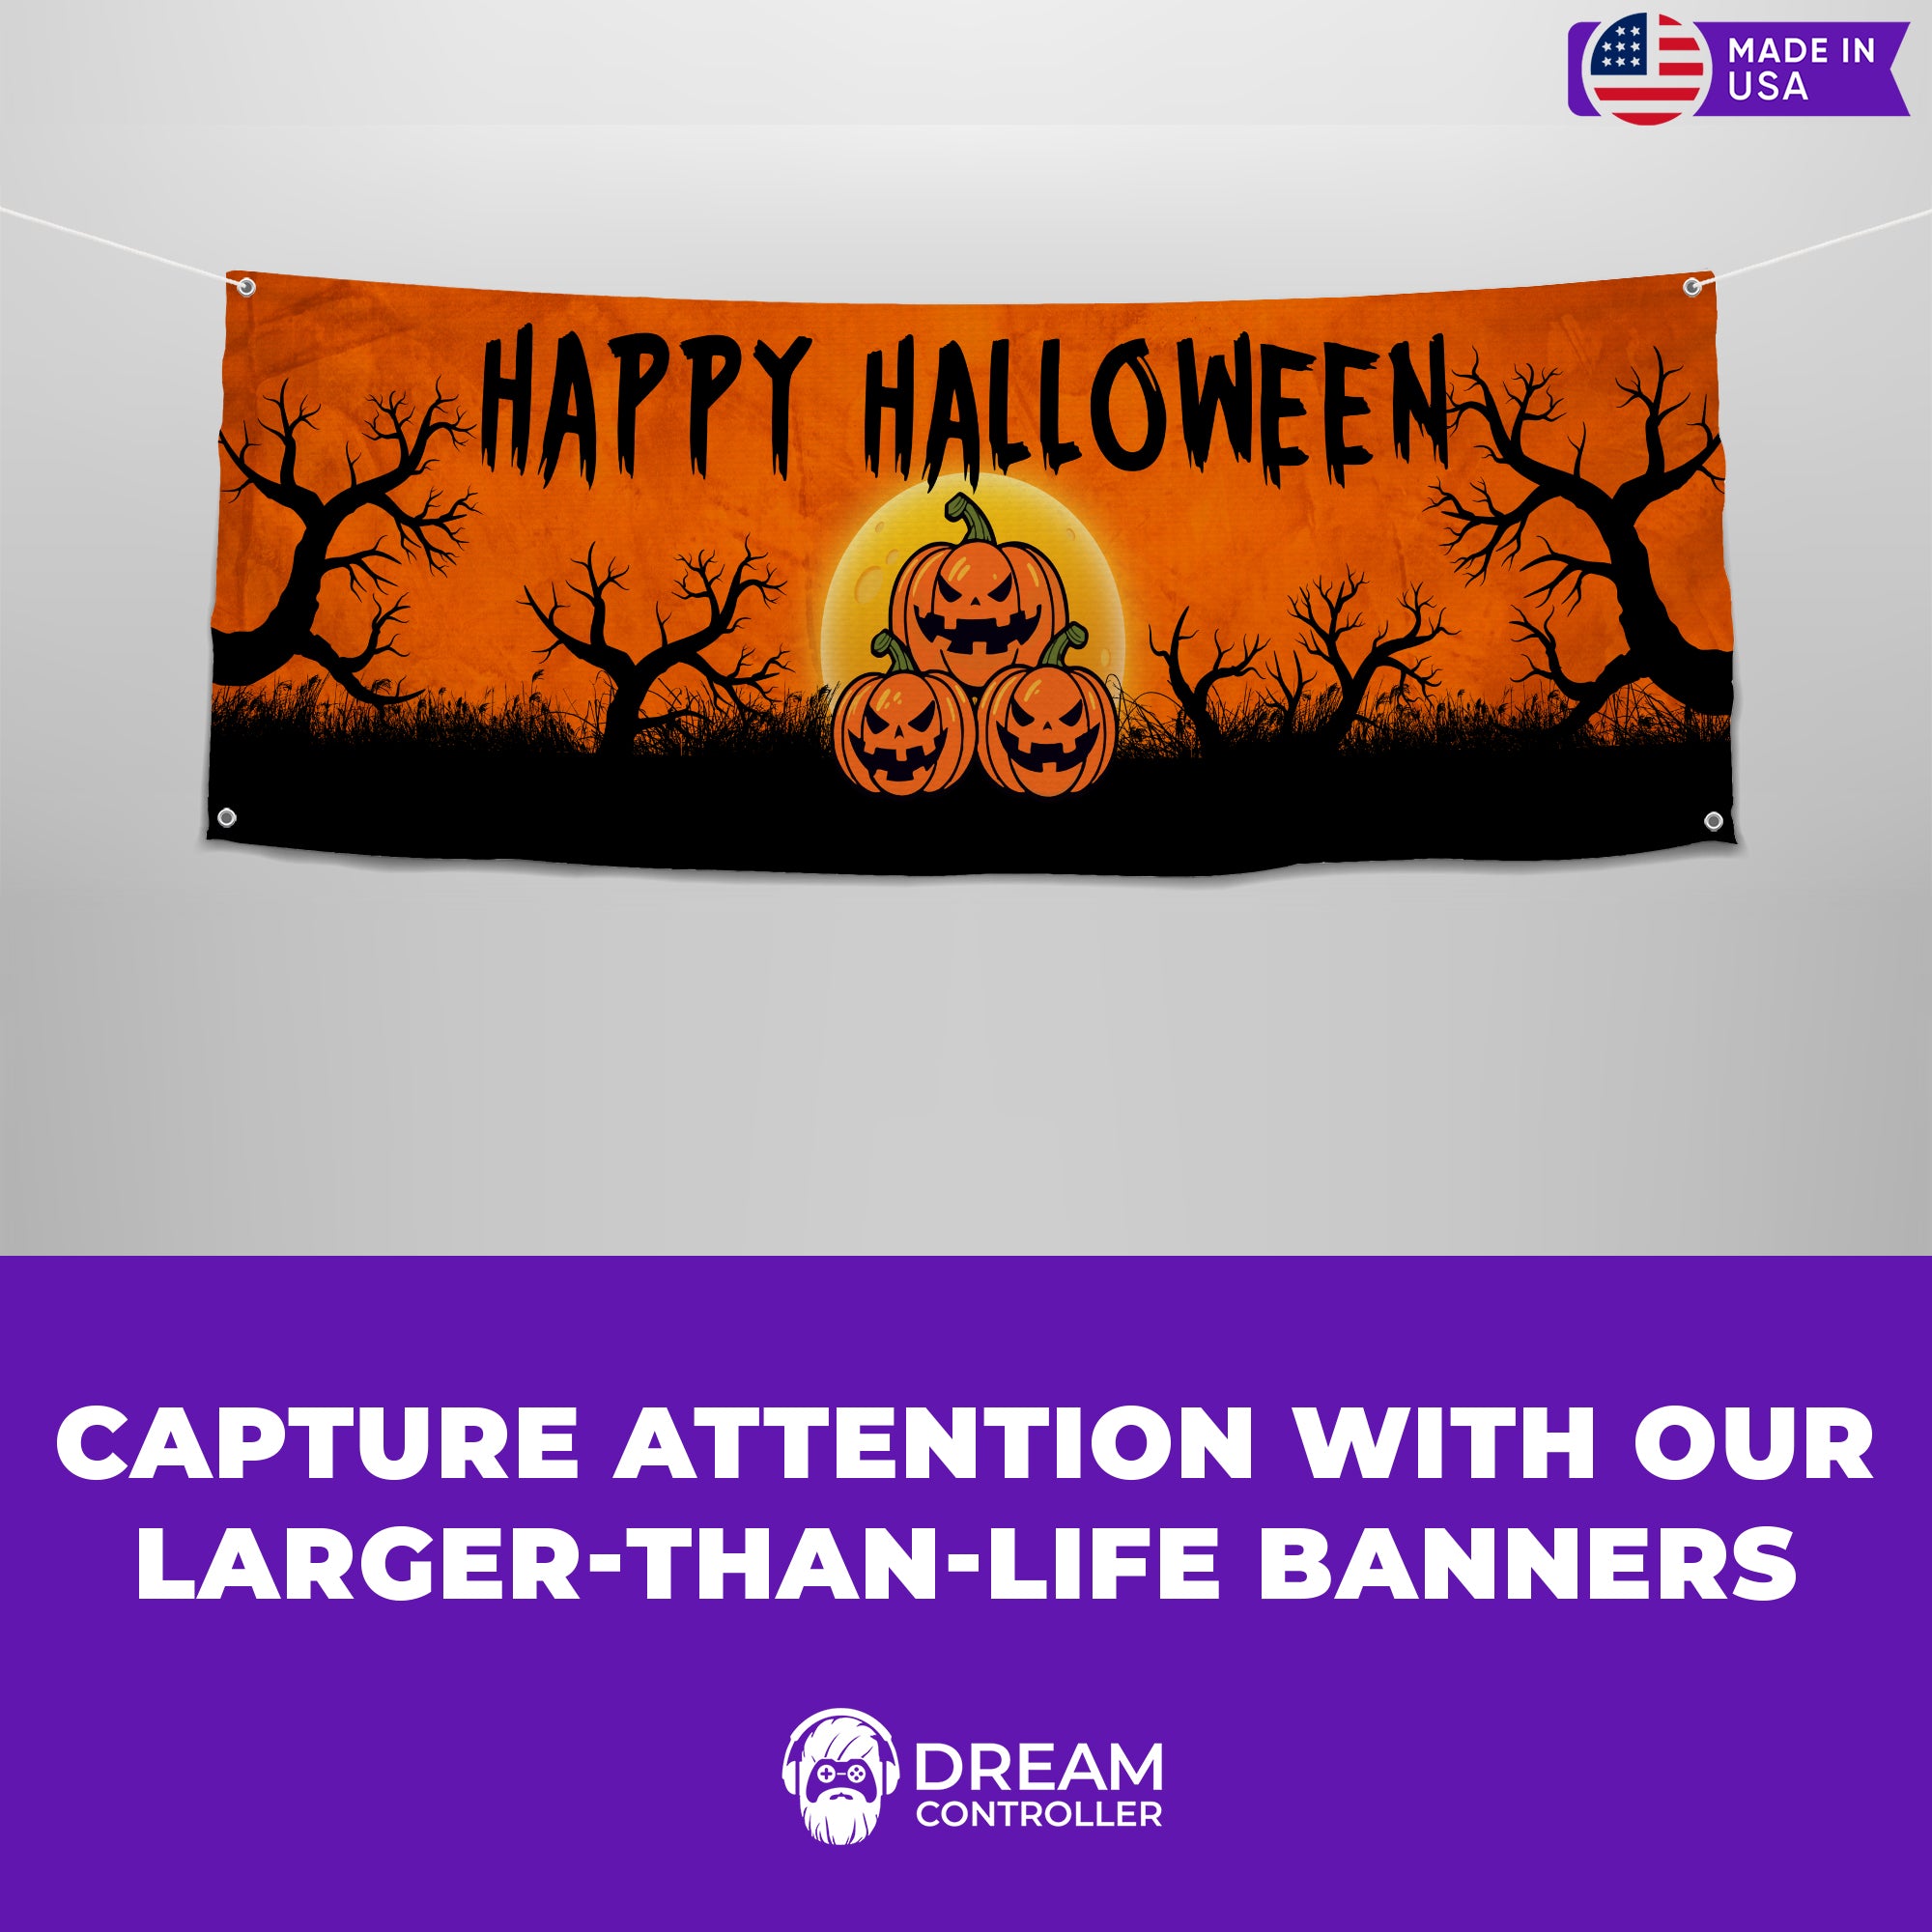 Dead Trees Halloween Banner - High-Quality Material, Easy to Hang and Reuse